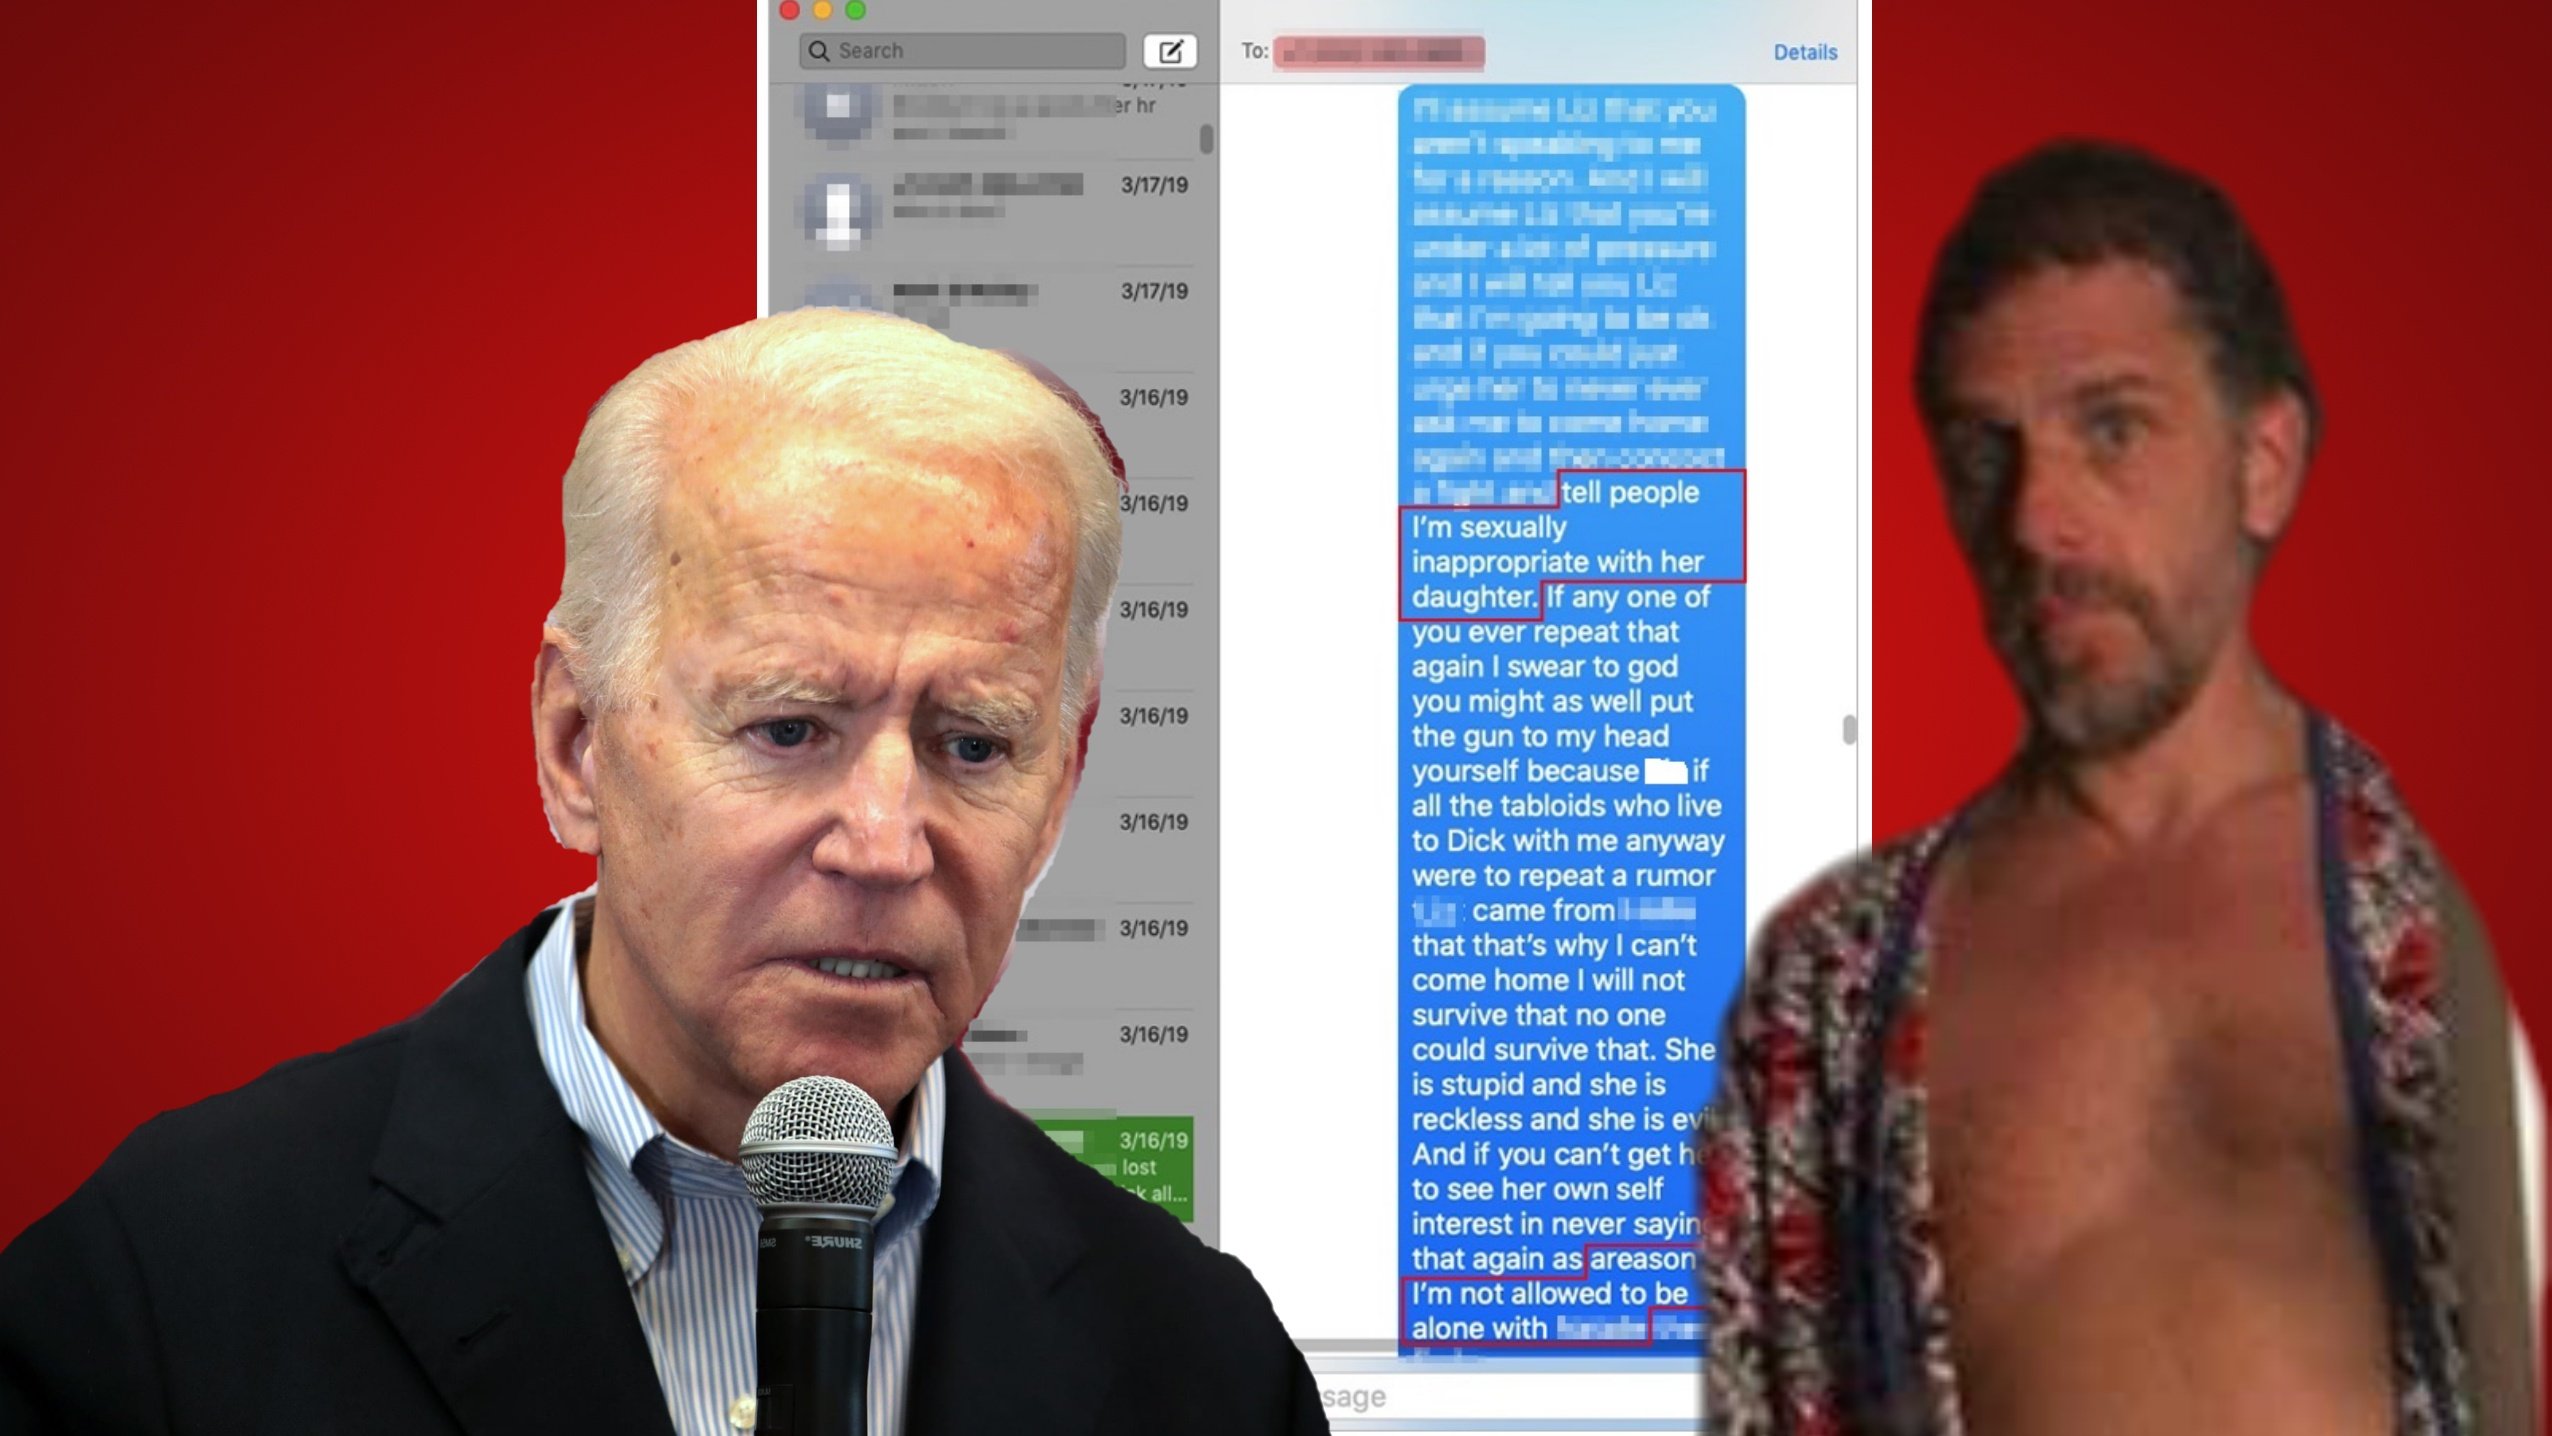 BREAKING EXCLUSIVE: Text Messages Show VP Biden and His Wife Colluded to Suppress HUNTER'S ACTIONS WITH A CERTAIN MINOR